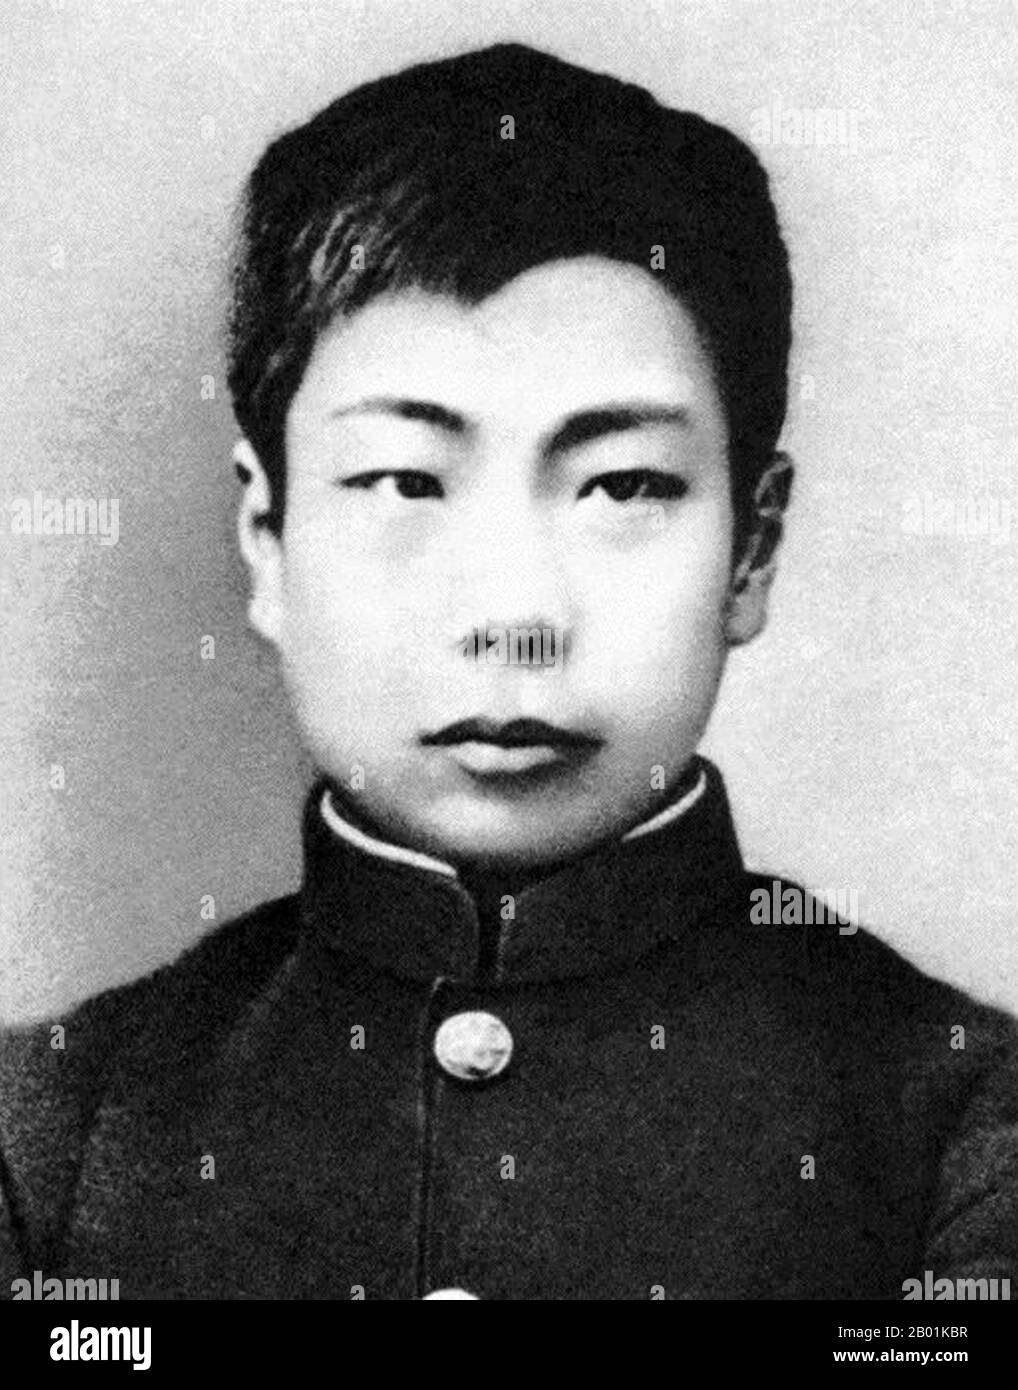 China: The Chinese writer Lu Xun (25 September 1881 - 19 October 1936) after he had just cut off his manchu braid to symbolise his resistance to national oppression, 1903.  Lu Xun (or Lu Hsun), was the pen name of Zhou Shuren (Chou Shu-jen), one of the major Chinese writers of the 20th century. Considered by many to be the founder of modern Chinese literature, he wrote in baihua (the vernacular) as well as classical Chinese. Lu Xun was a short story writer, editor, translator, critic, essayist and poet. In the 1930s he became the head of the Chinese League of the Left-Wing Writers in Shanghai. Stock Photo